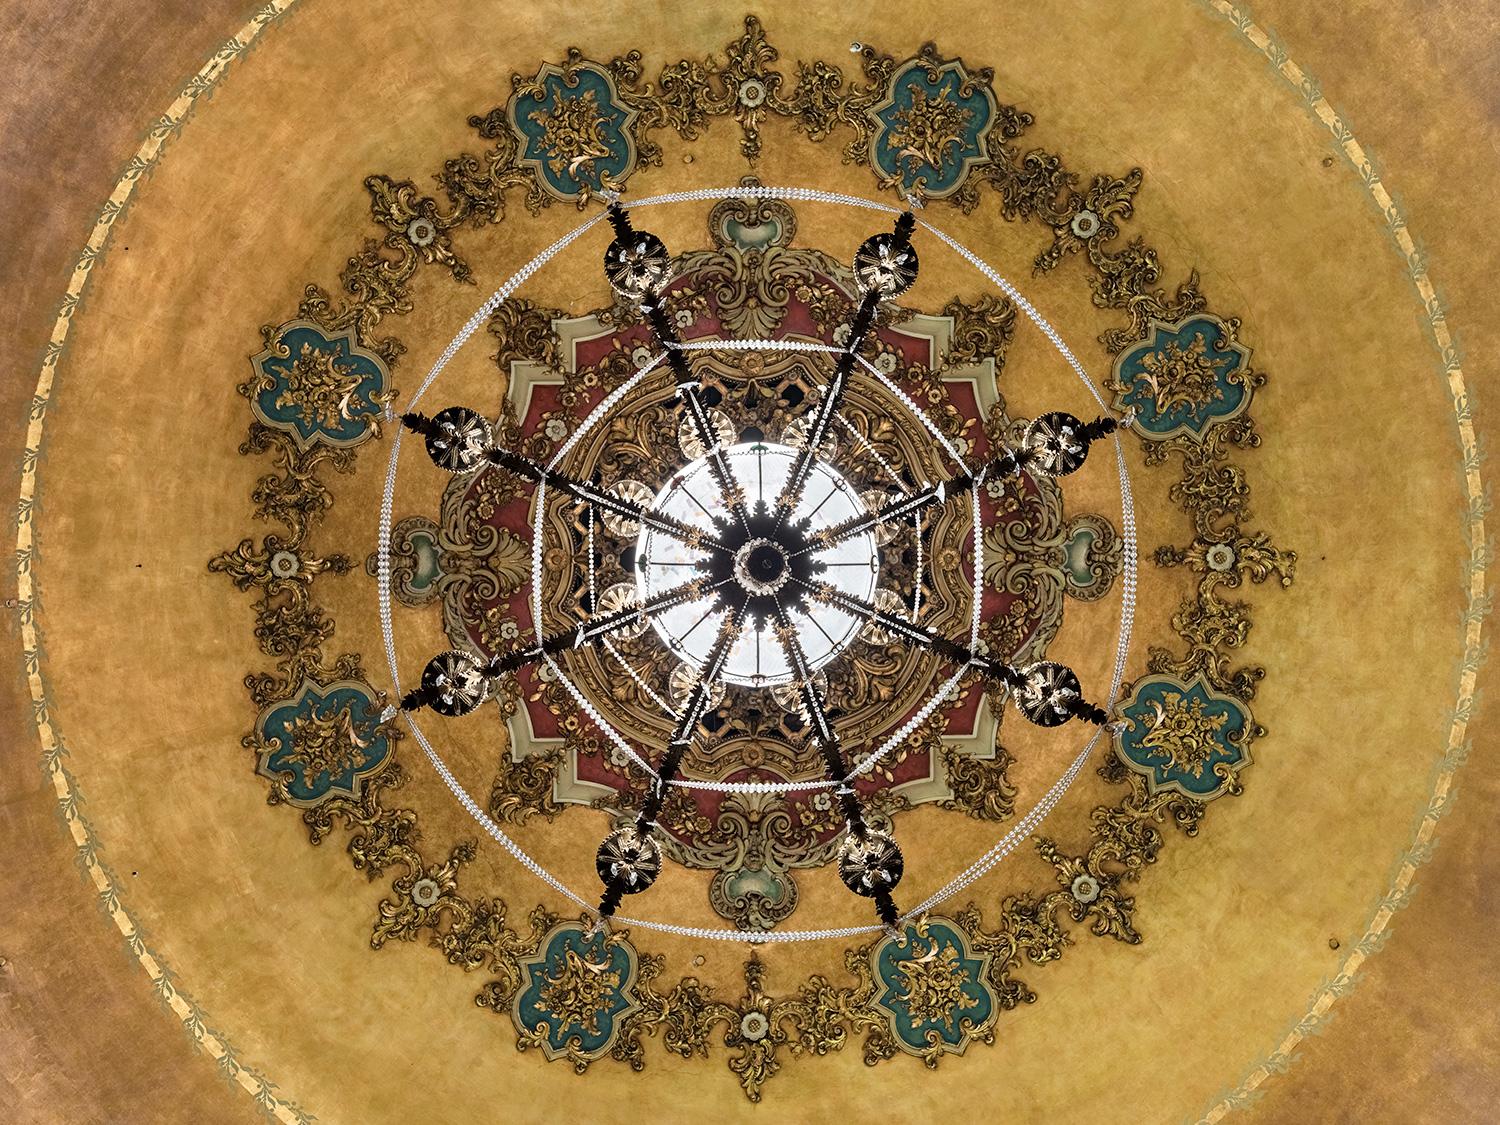 Christos J. Palios - Midland Theatre Ceiling Dome, Study II, 2021, Printed After